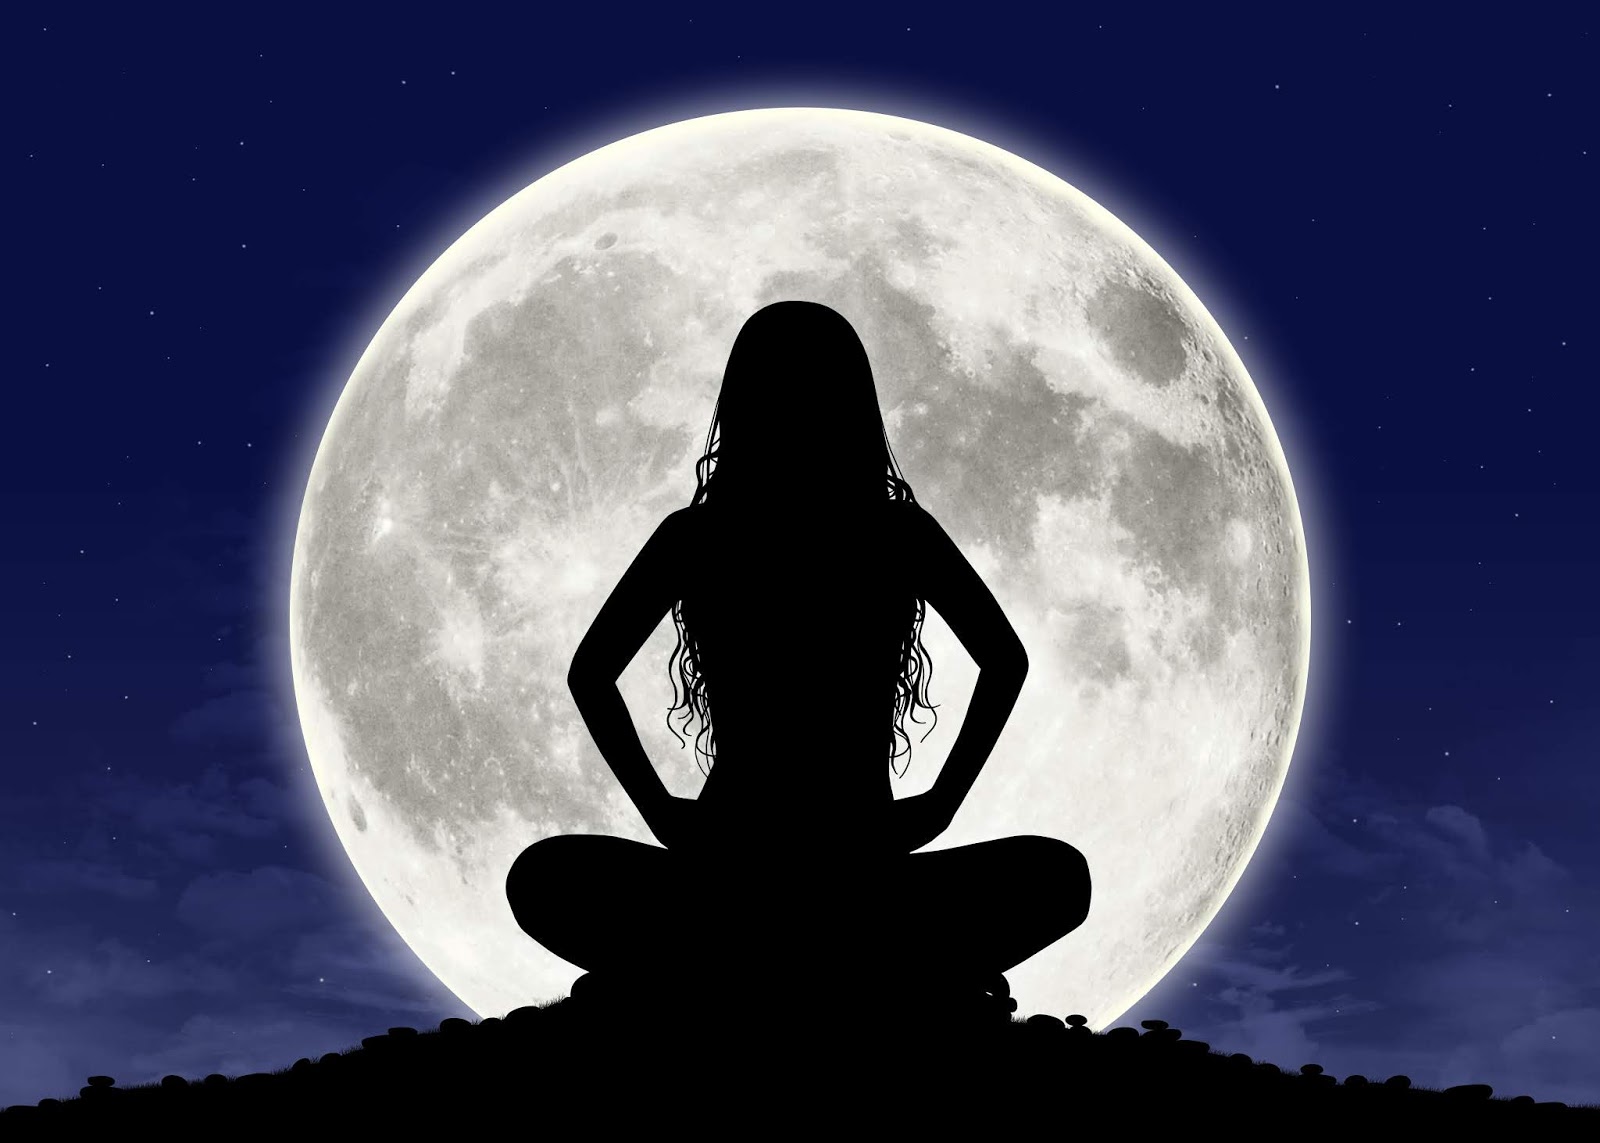 silhouette of a young beautiful woman with long hair in meditation posture with the full moon on the background